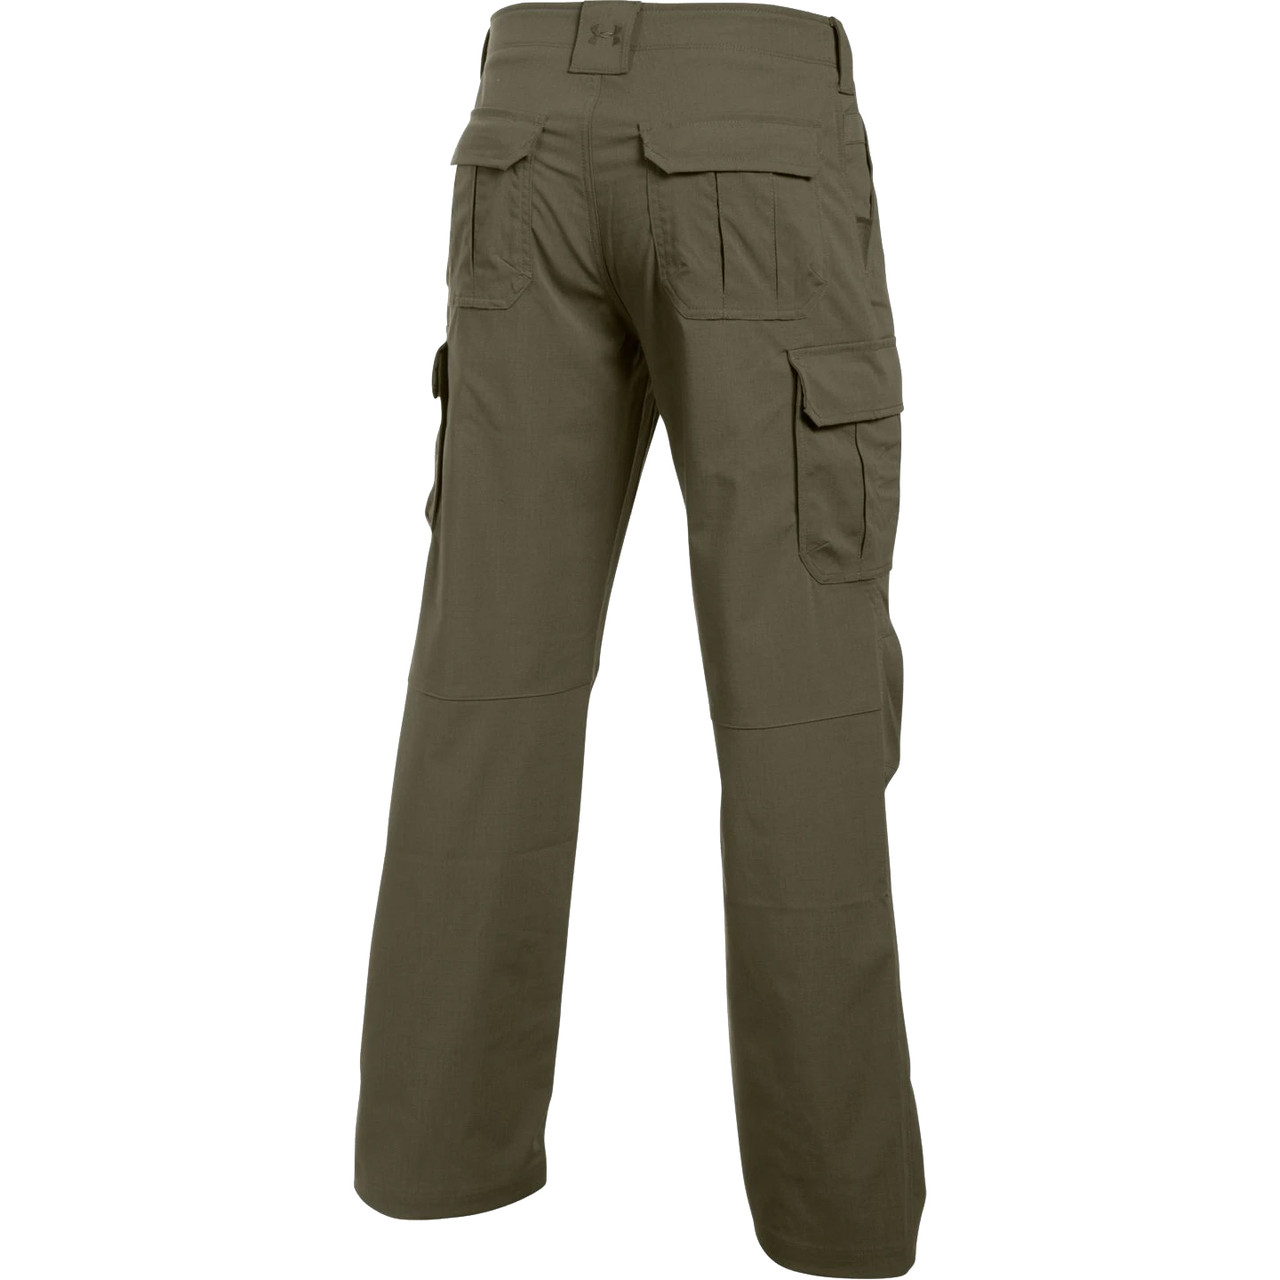 Under Armour Storm Tactical Patrol Men's Pants Stretch-Engineered